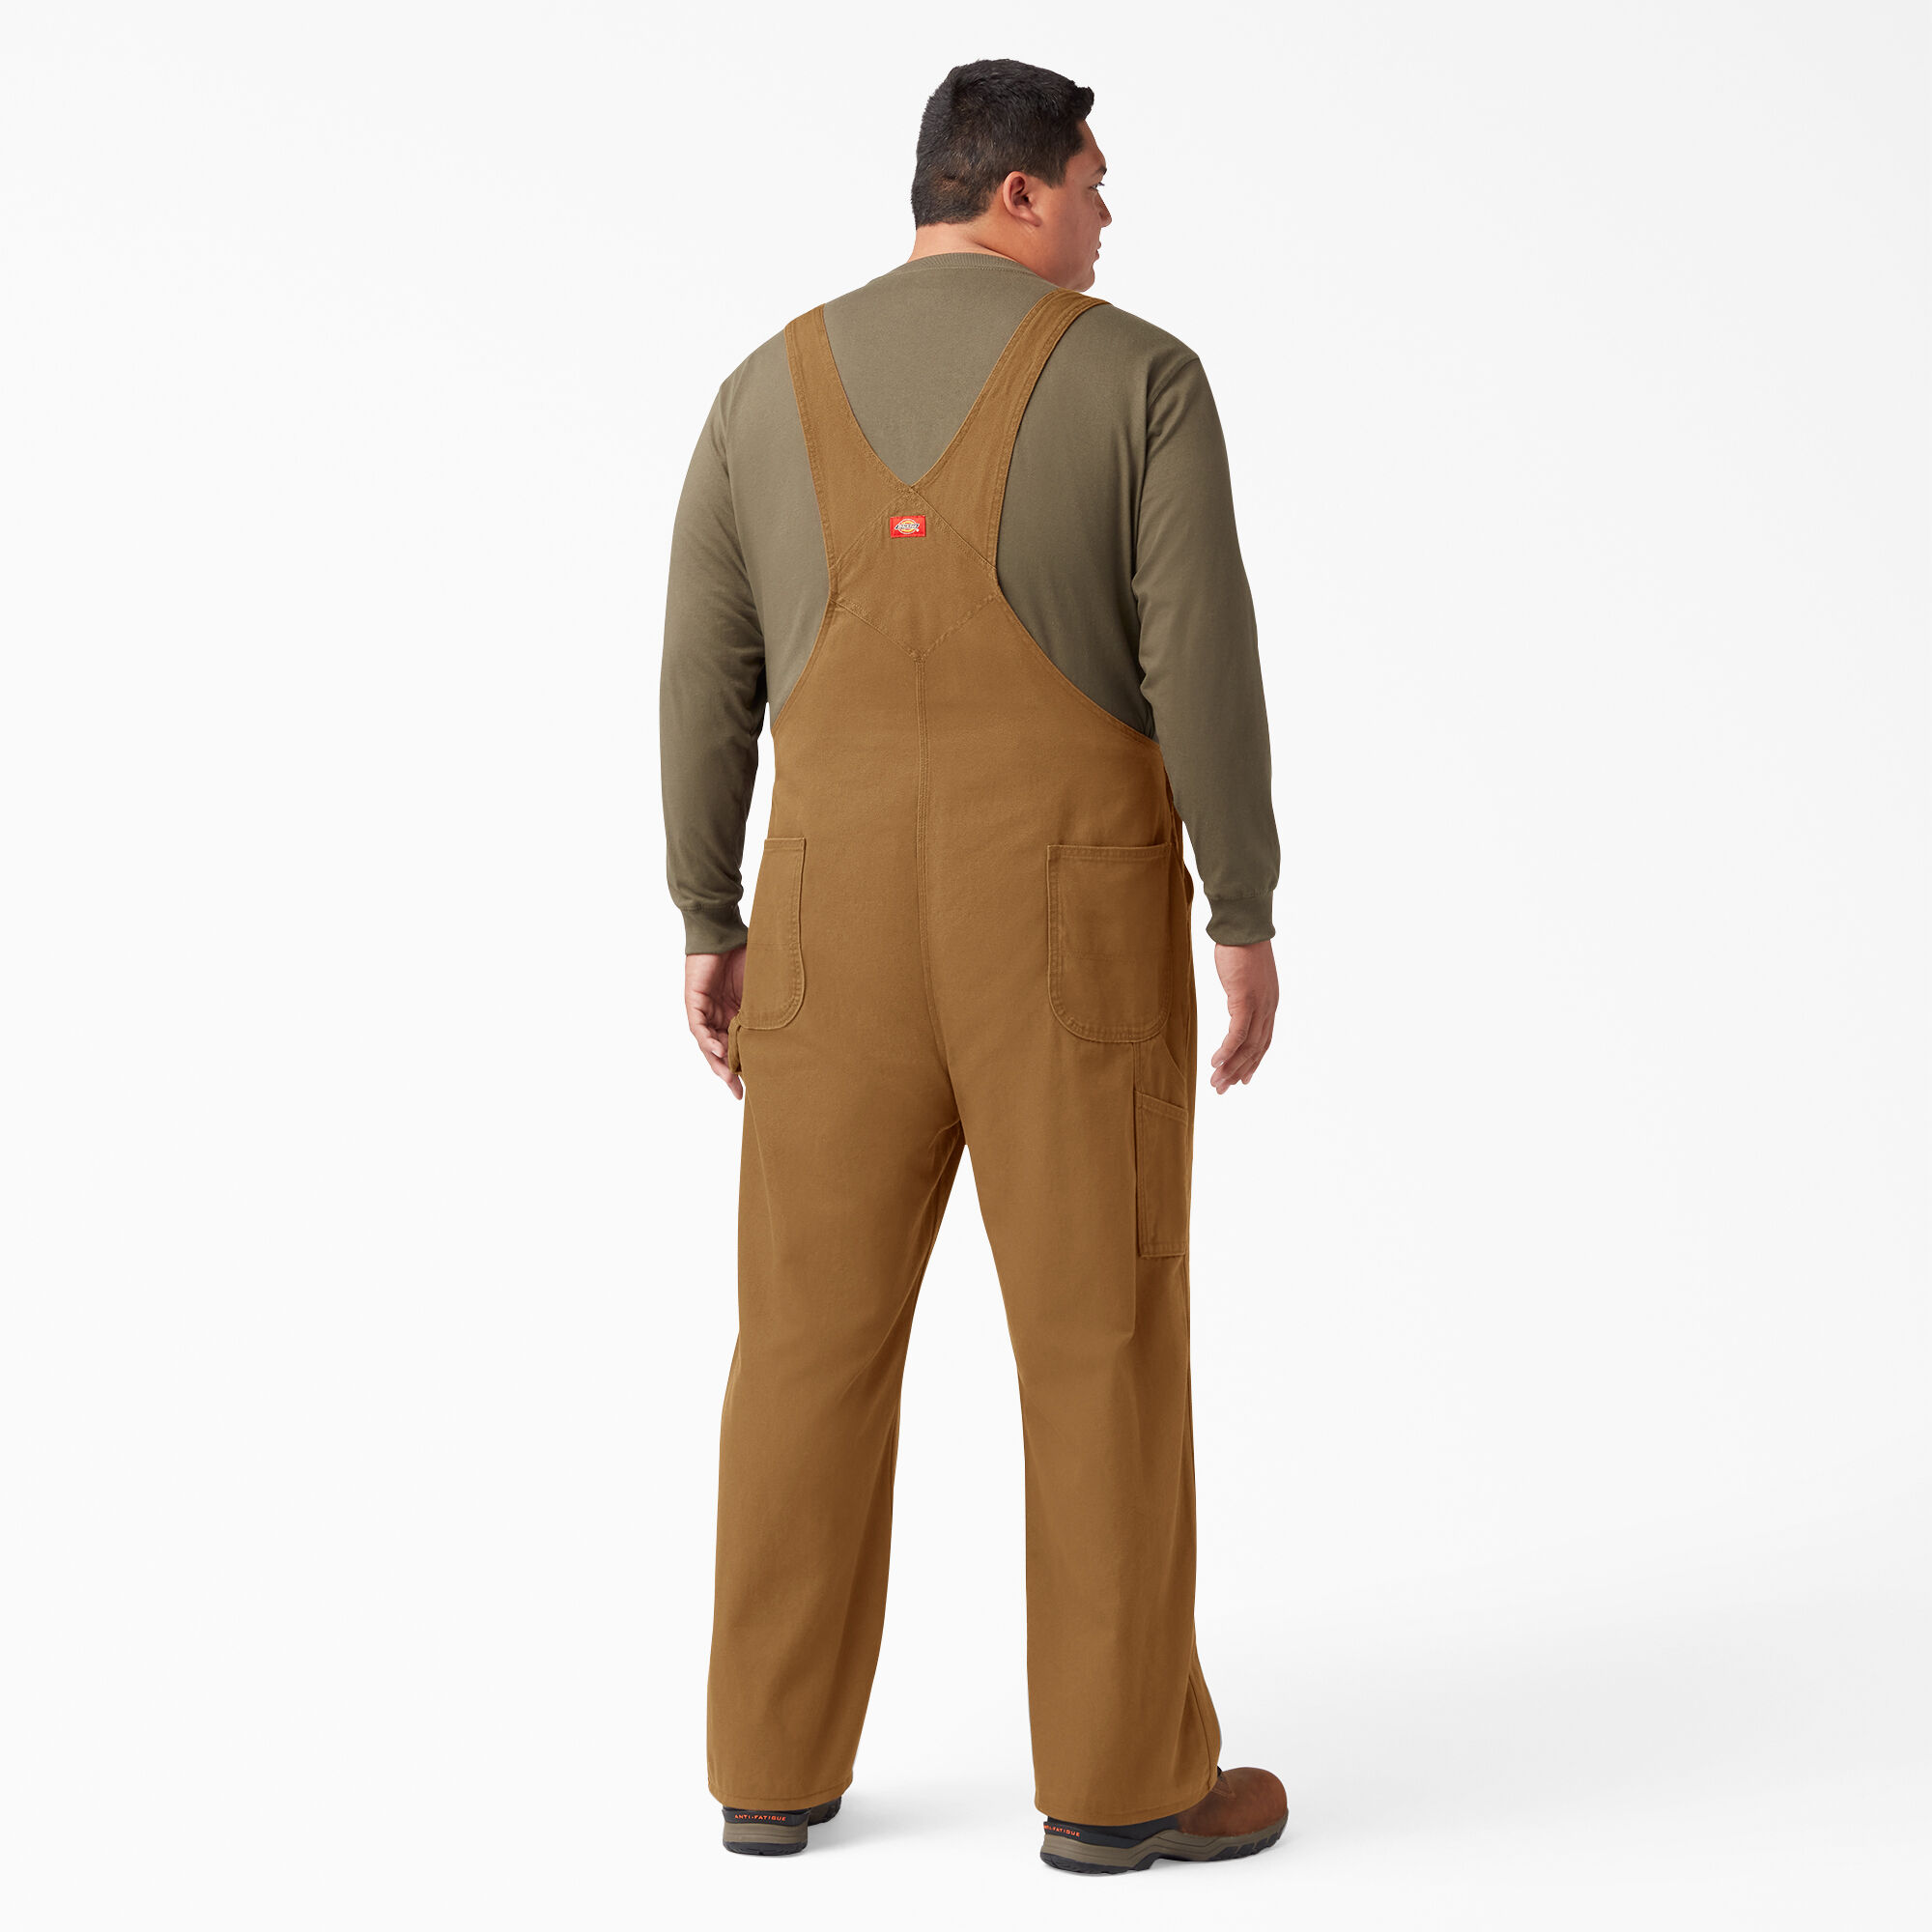 W42/L32 Brown Manufacturer Size: W42/L32 Brown Duck Dickies Mens Latzhose Bib Overall Smooth Bib Overall Workwear Overalls 